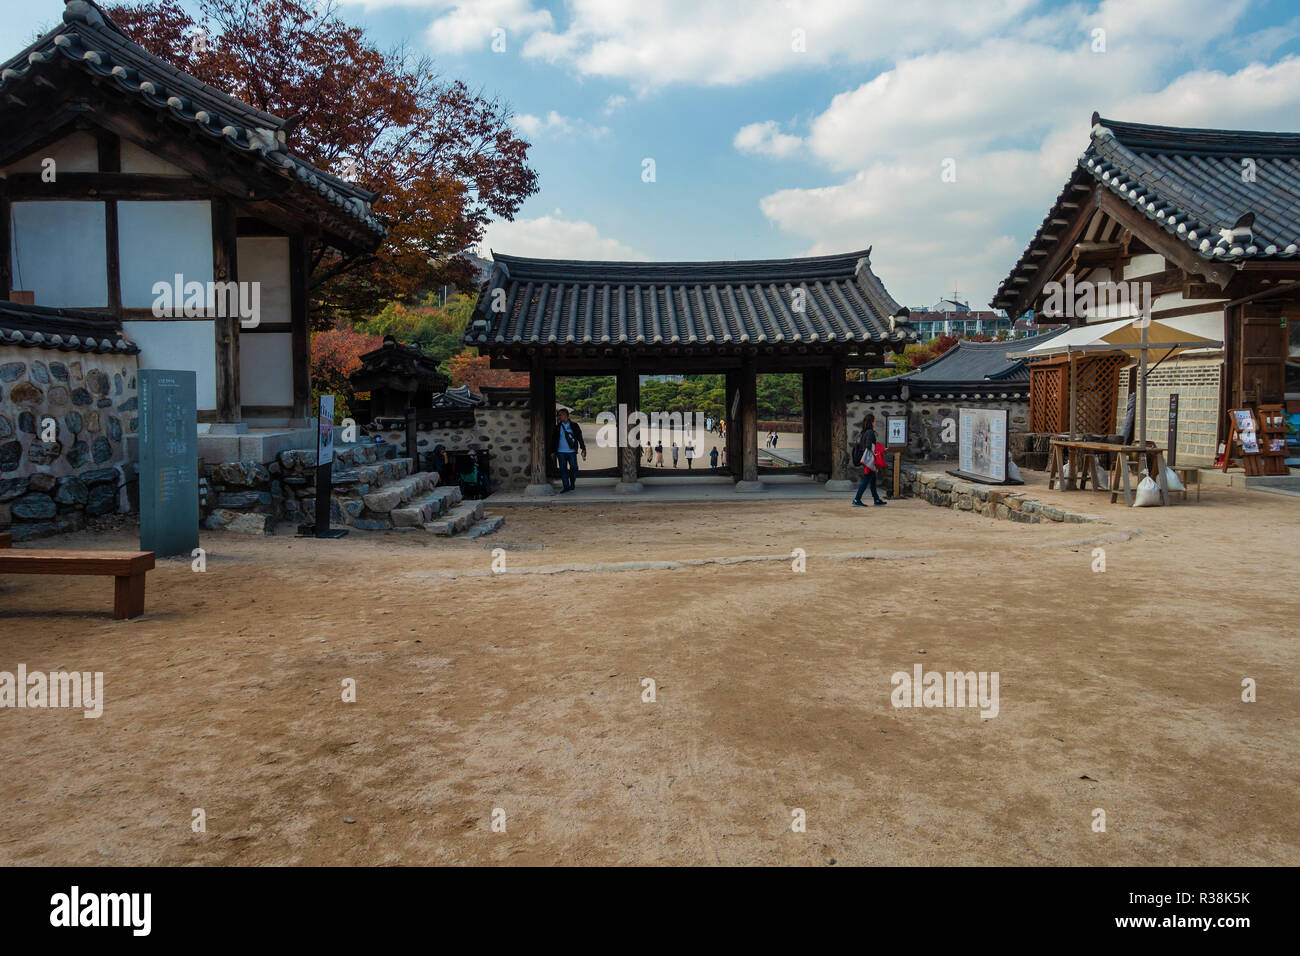 Namsangol anok Village is a traditional, old village in Seoul, South Korea. Stock Photo